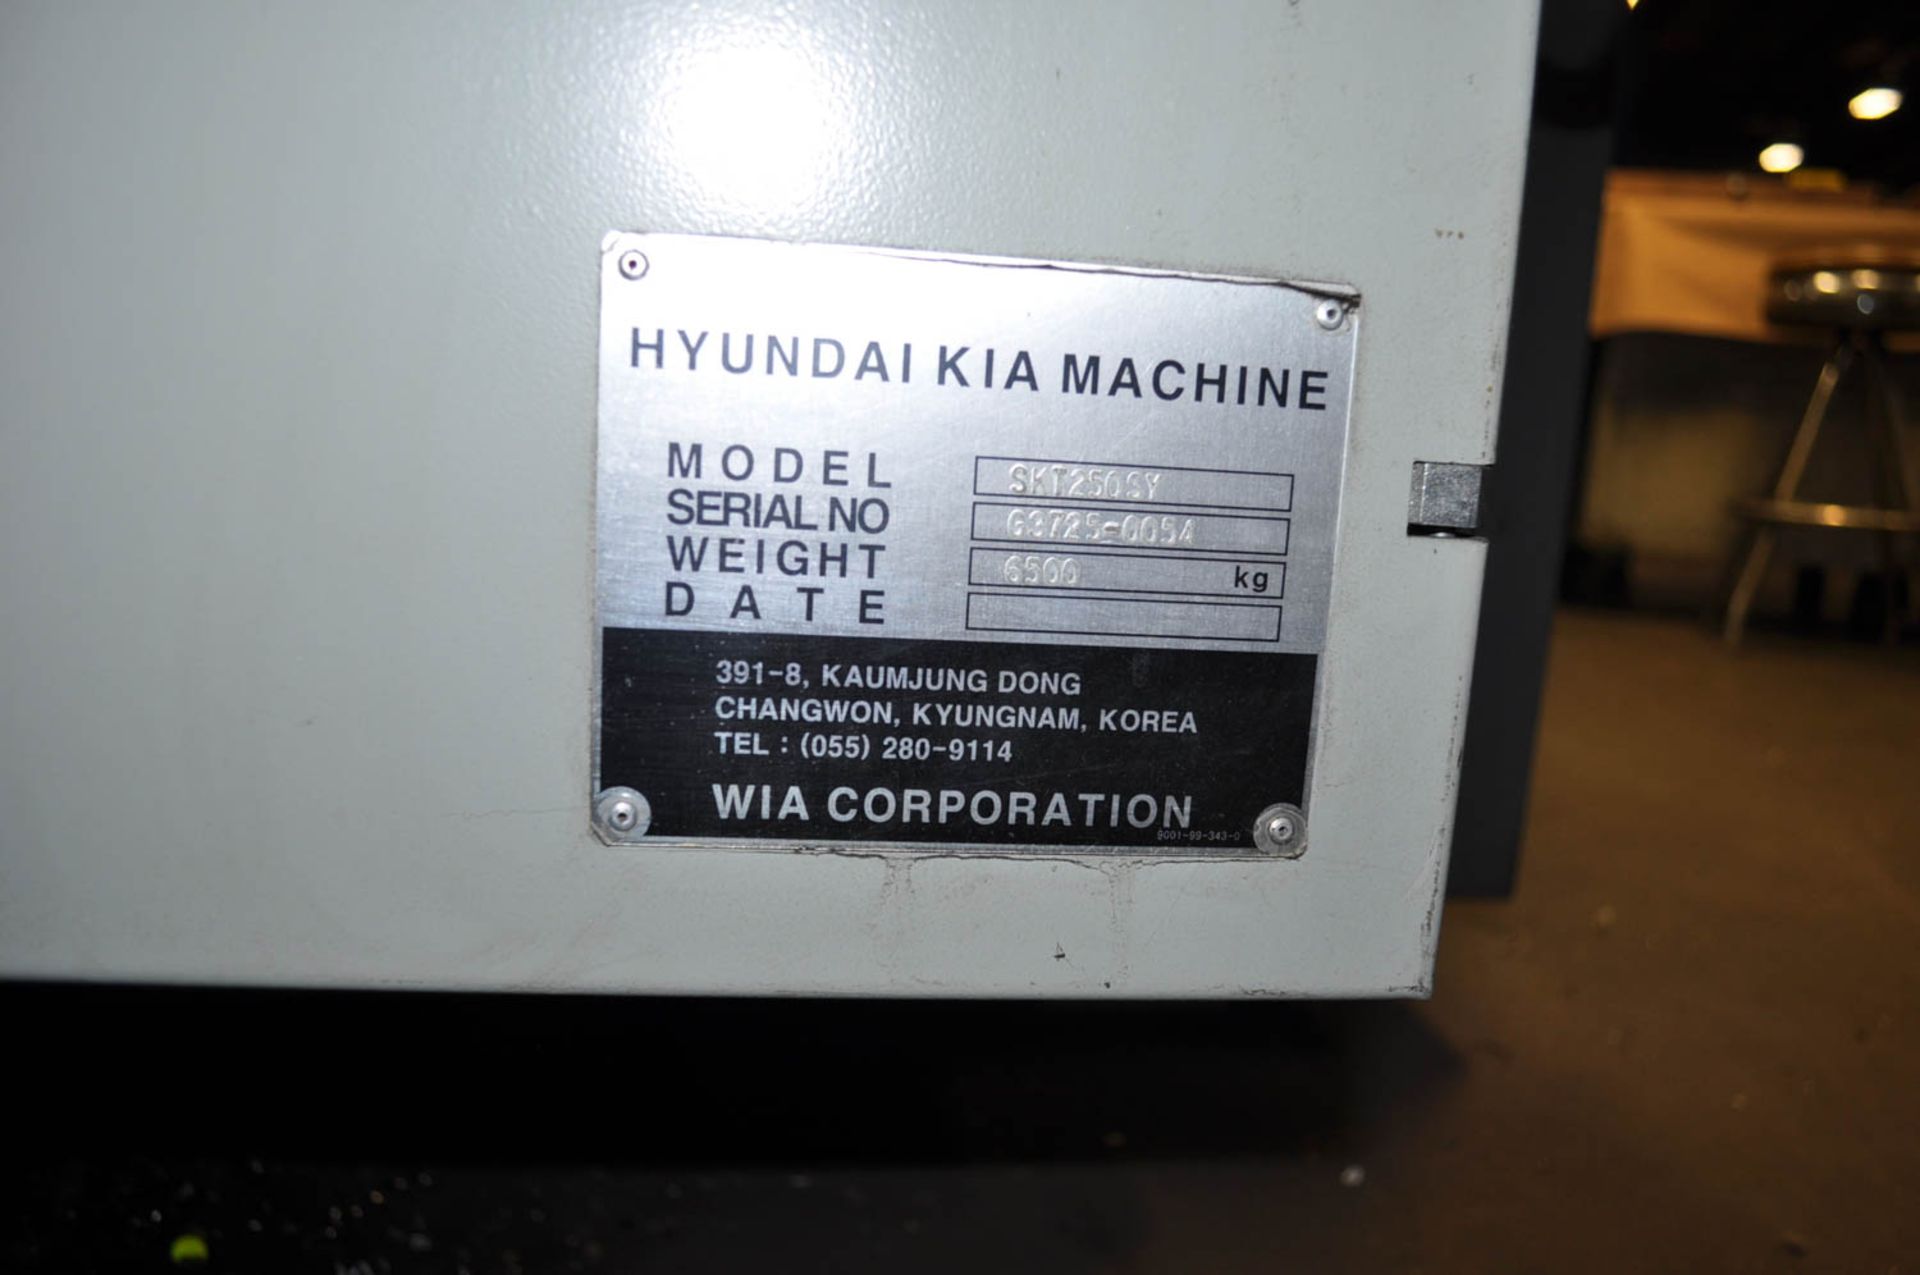 HYUNDAI KIA MDL. SKT250SY CNC TURNING CENTER, WITH SUB-SPINDLE, C/Y AXIS, LIVE MILLING, FANUC - Image 7 of 7